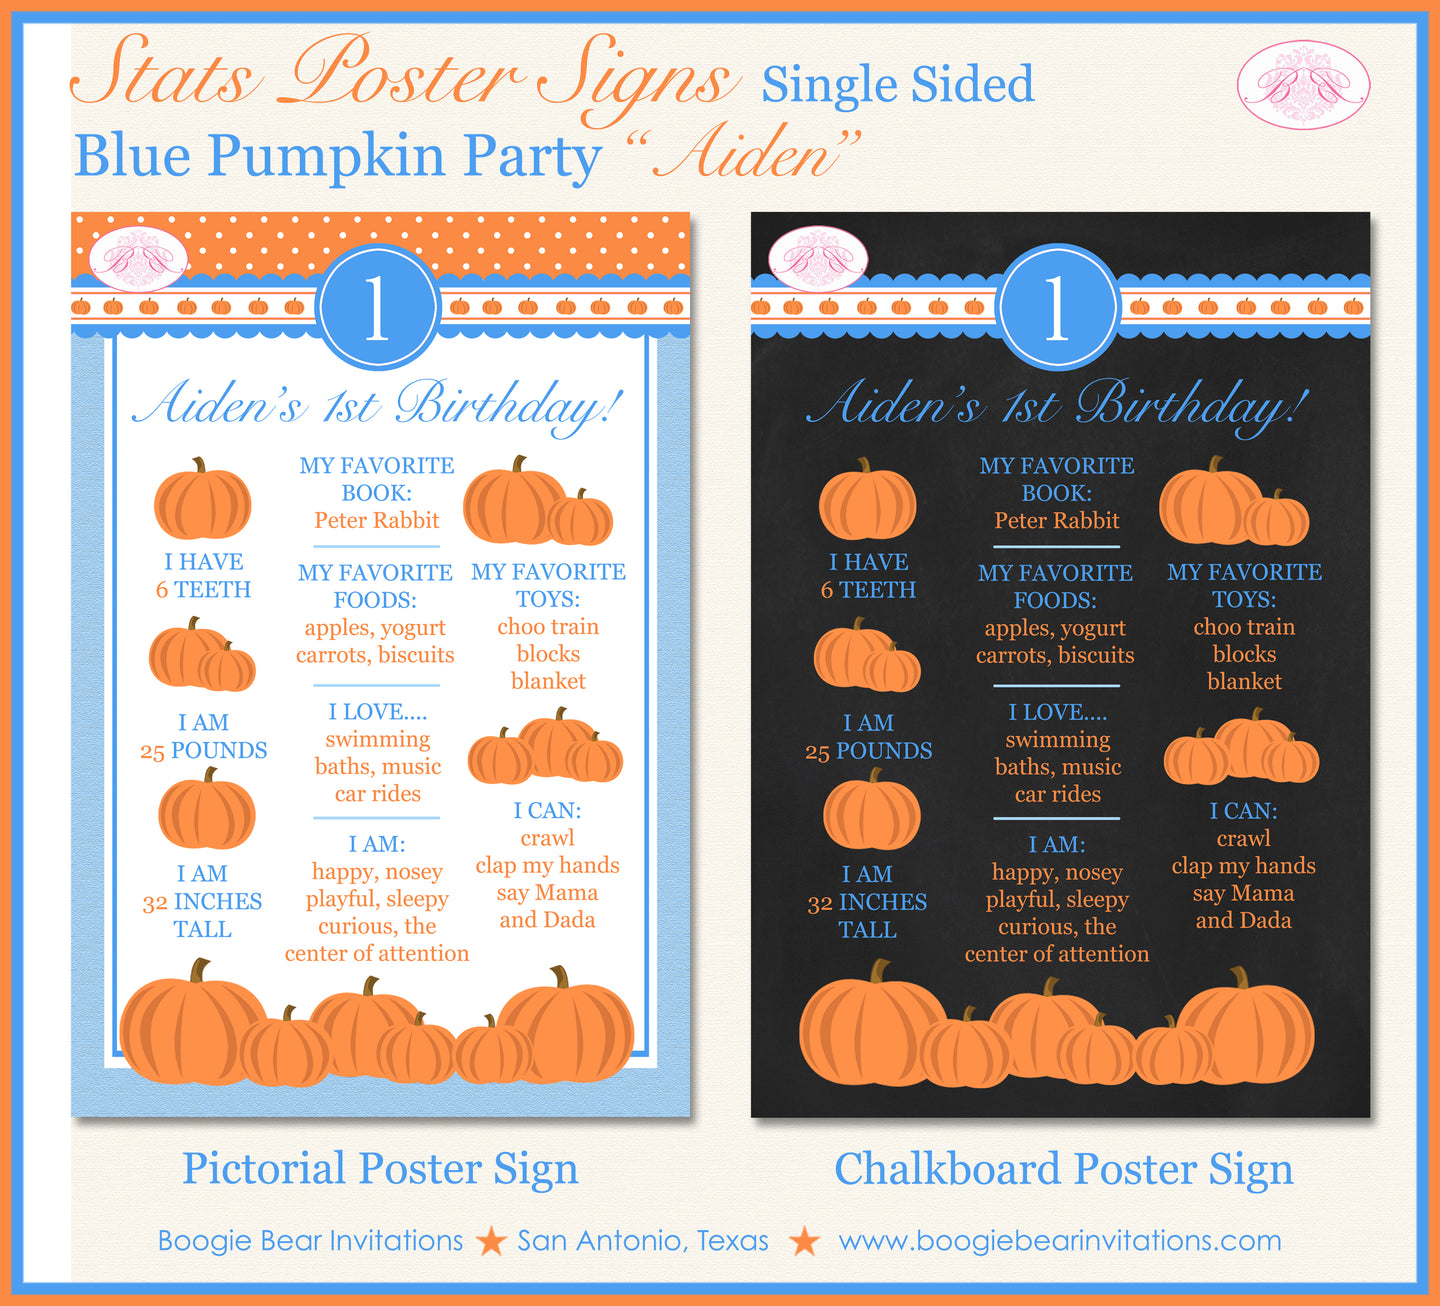 Blue Pumpkin Birthday Party Sign Stats Poster Chalkboard Farm Country Orange Boy 1st 2nd Boogie Bear Invitations Aiden Theme